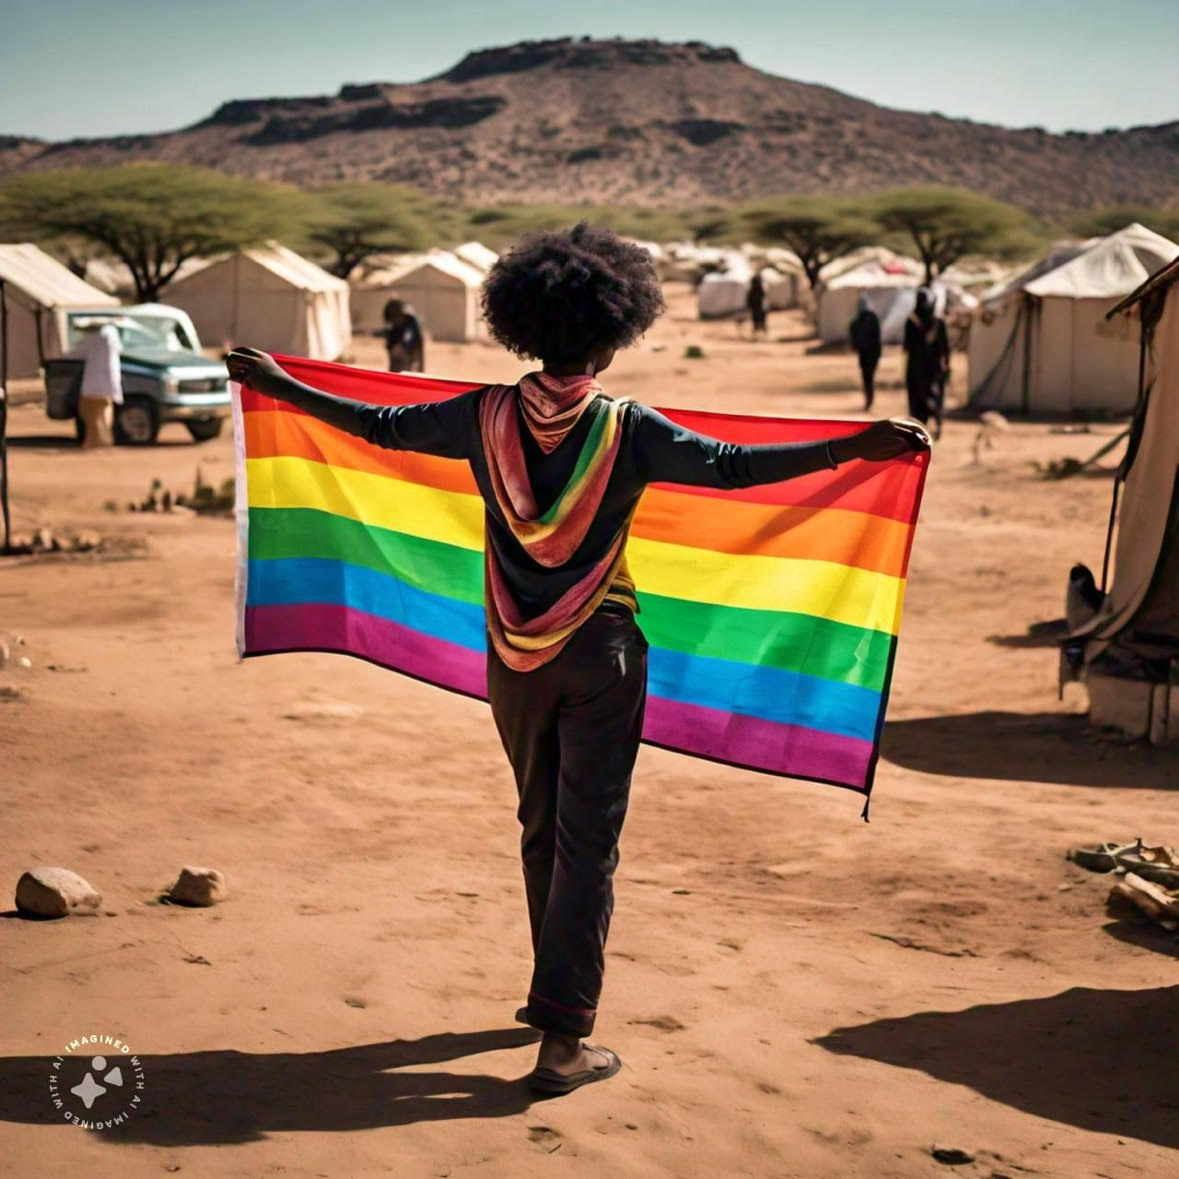 A lone black activist is seen holding an LGBT Pride flag in the center of an African Camp